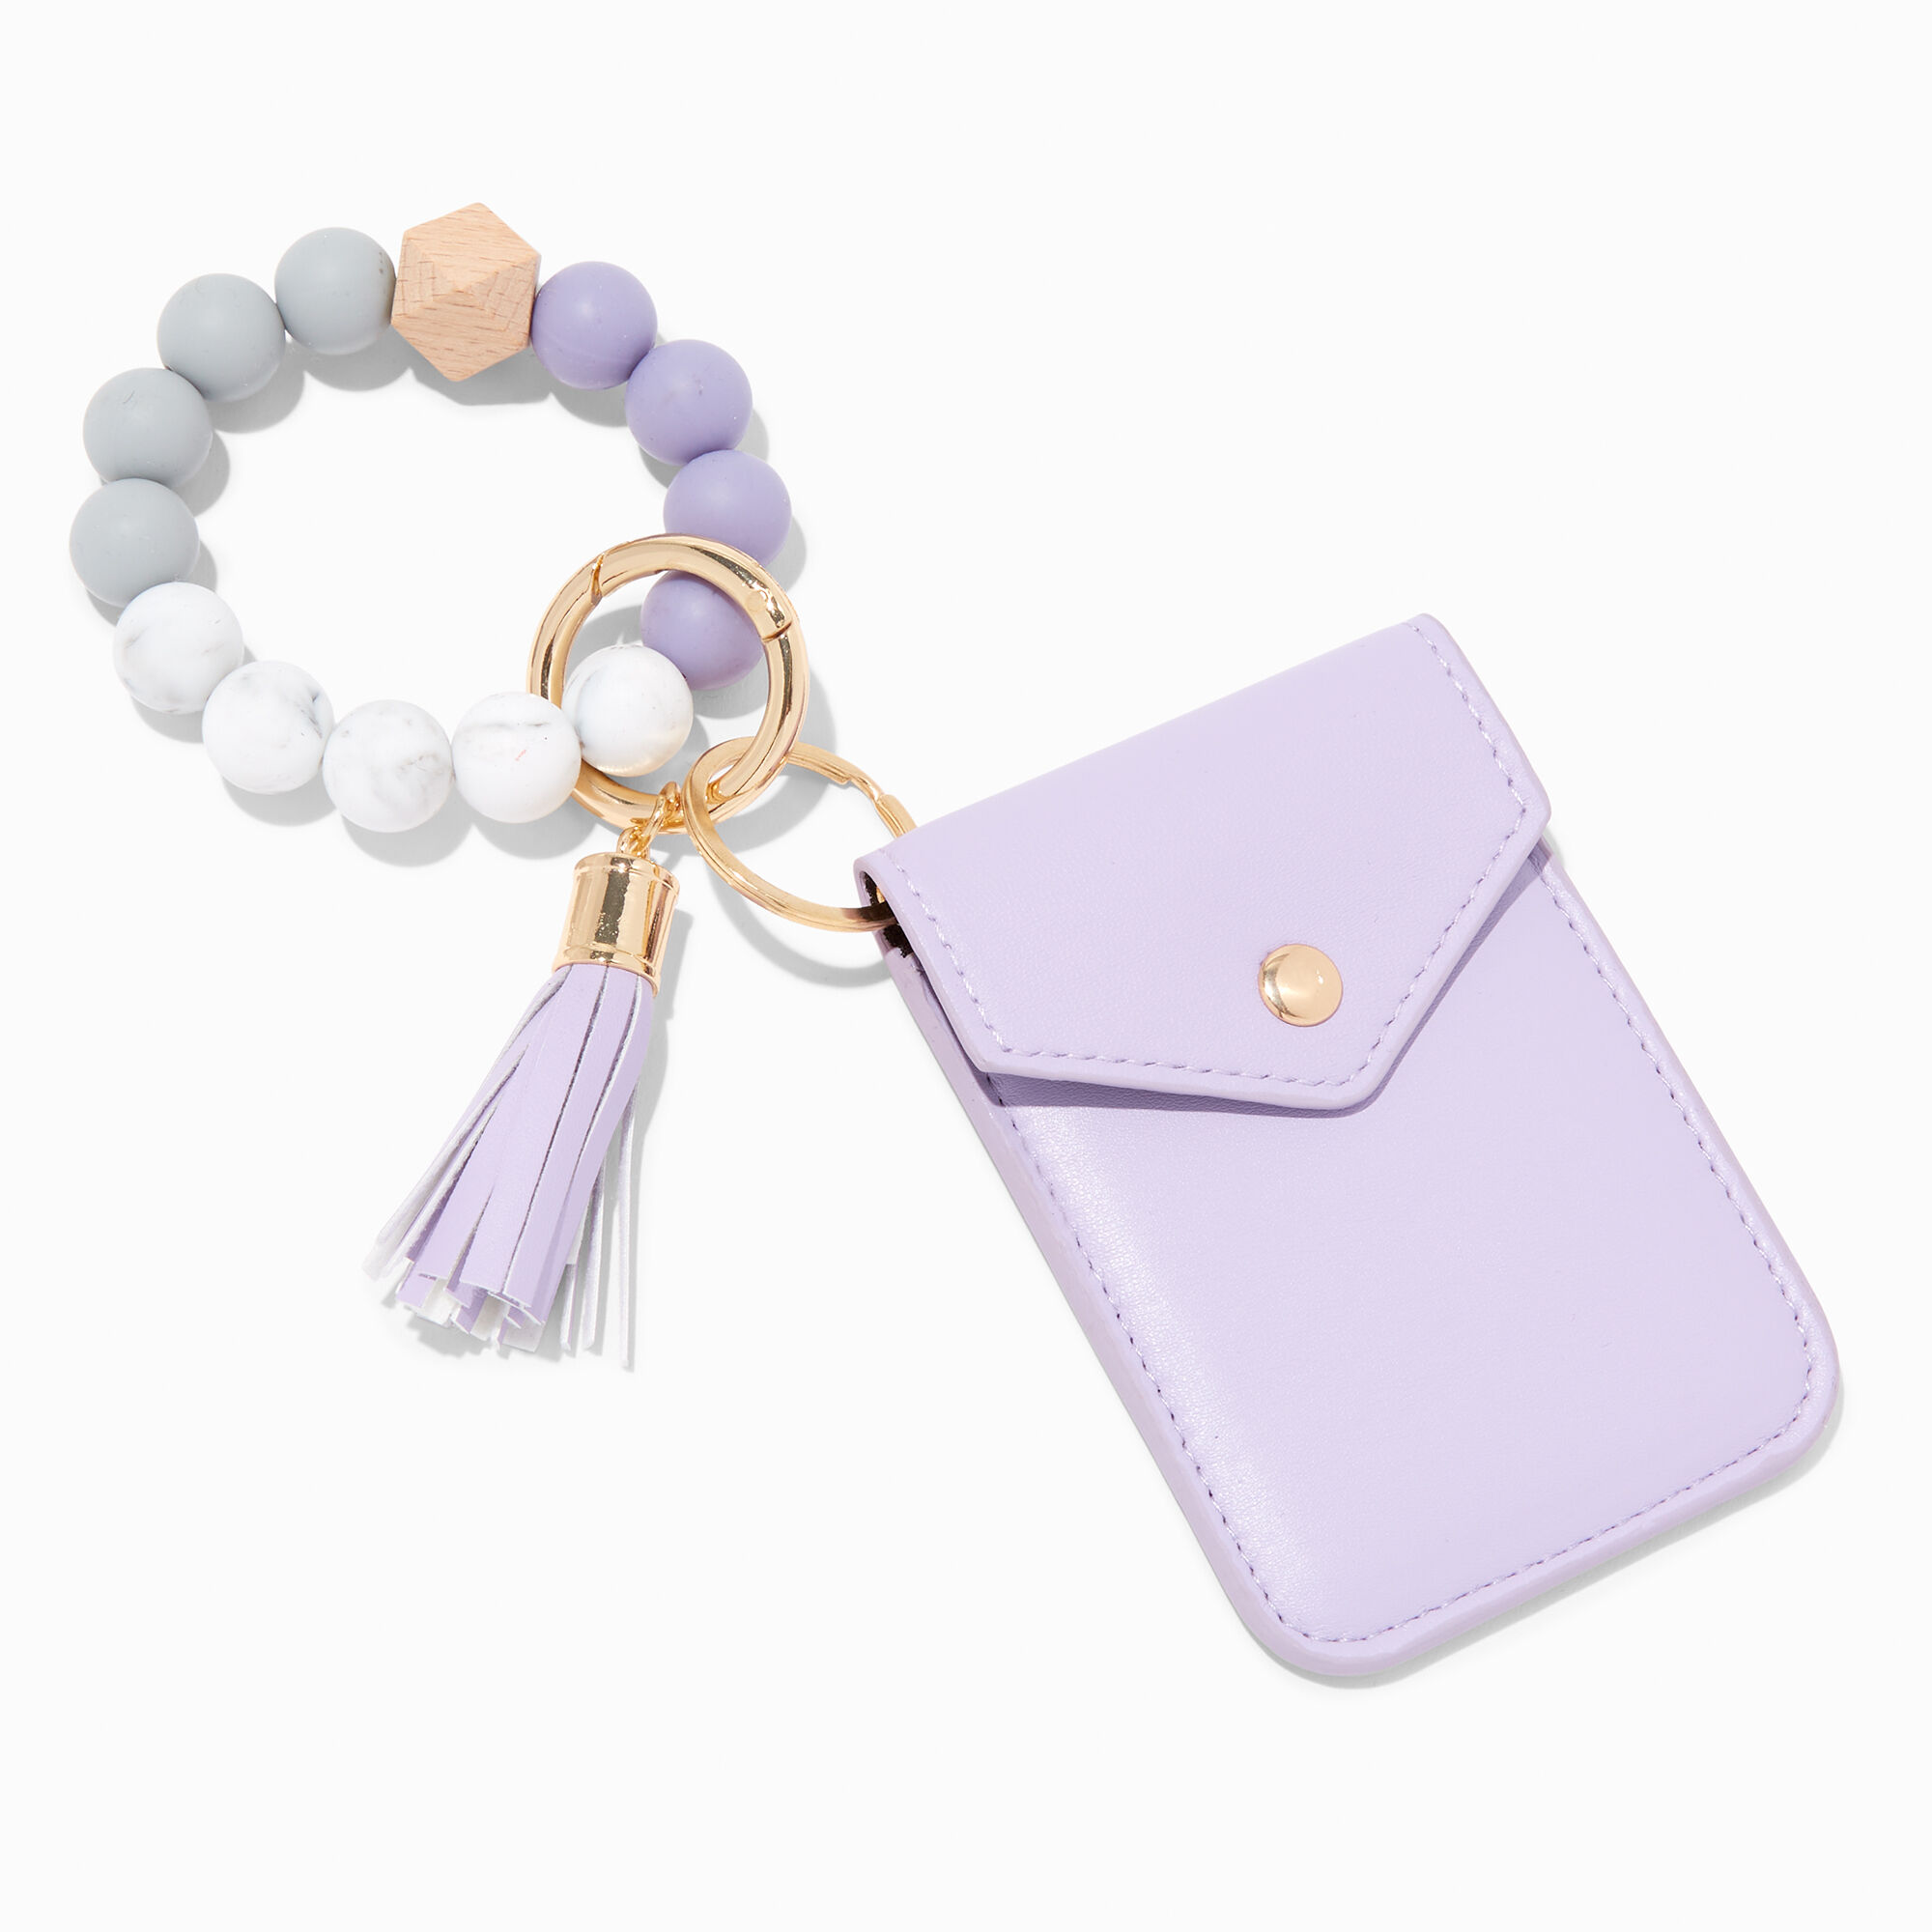 View Claires Beaded Bracelet With Lavender Mini Snap Wallet information